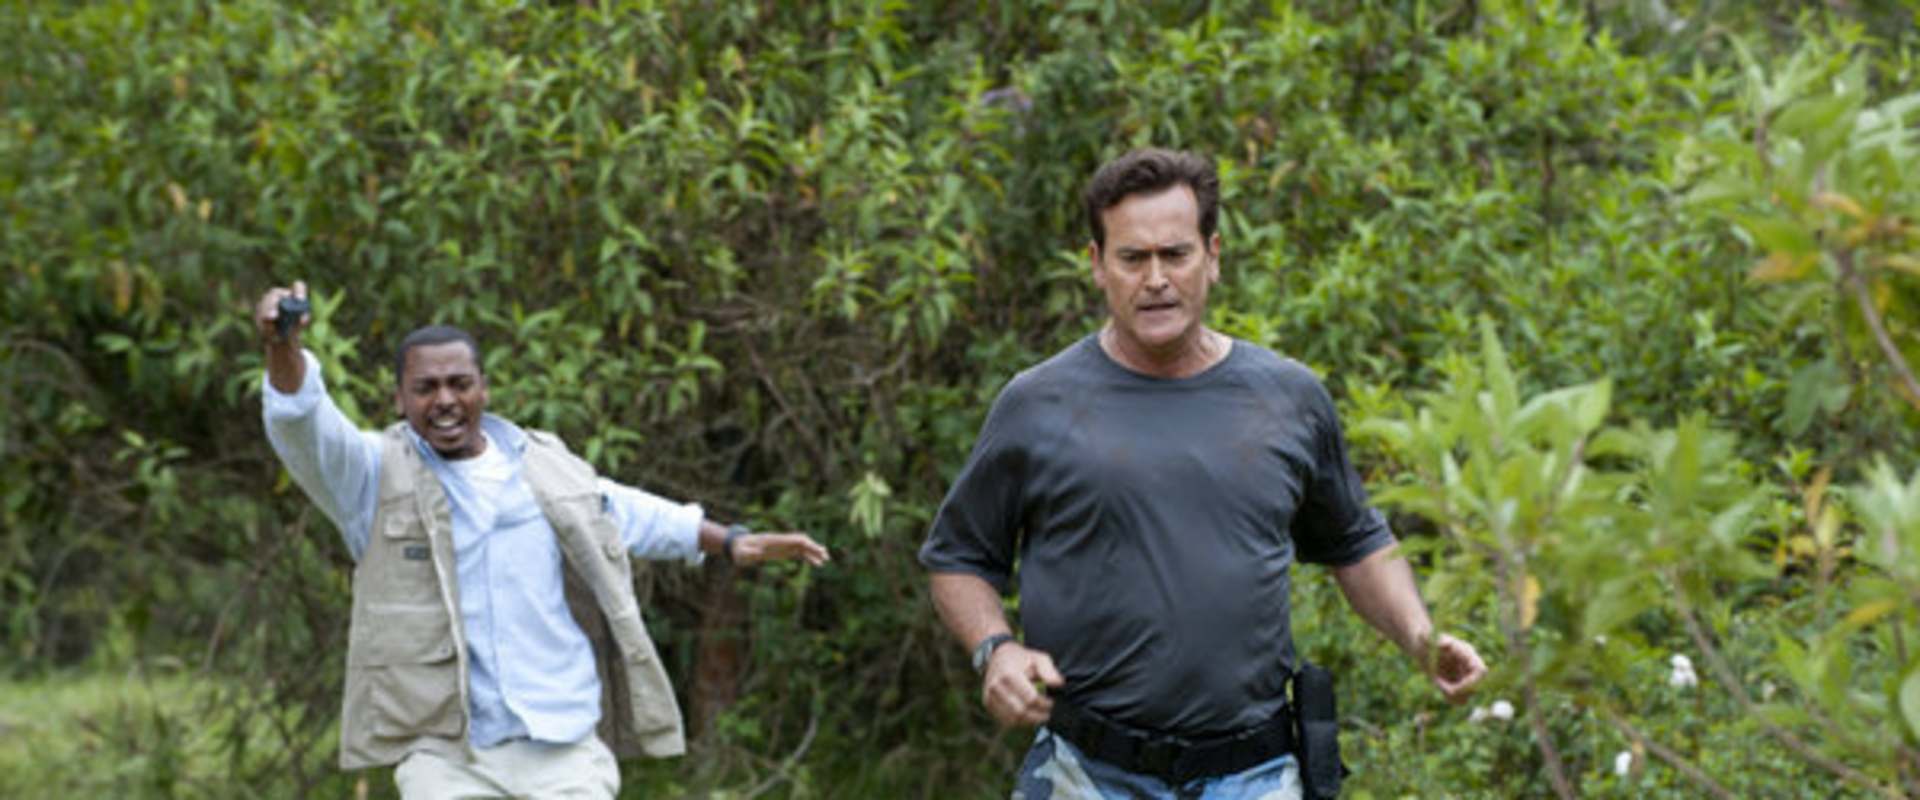 Burn Notice: The Fall of Sam Axe background 2